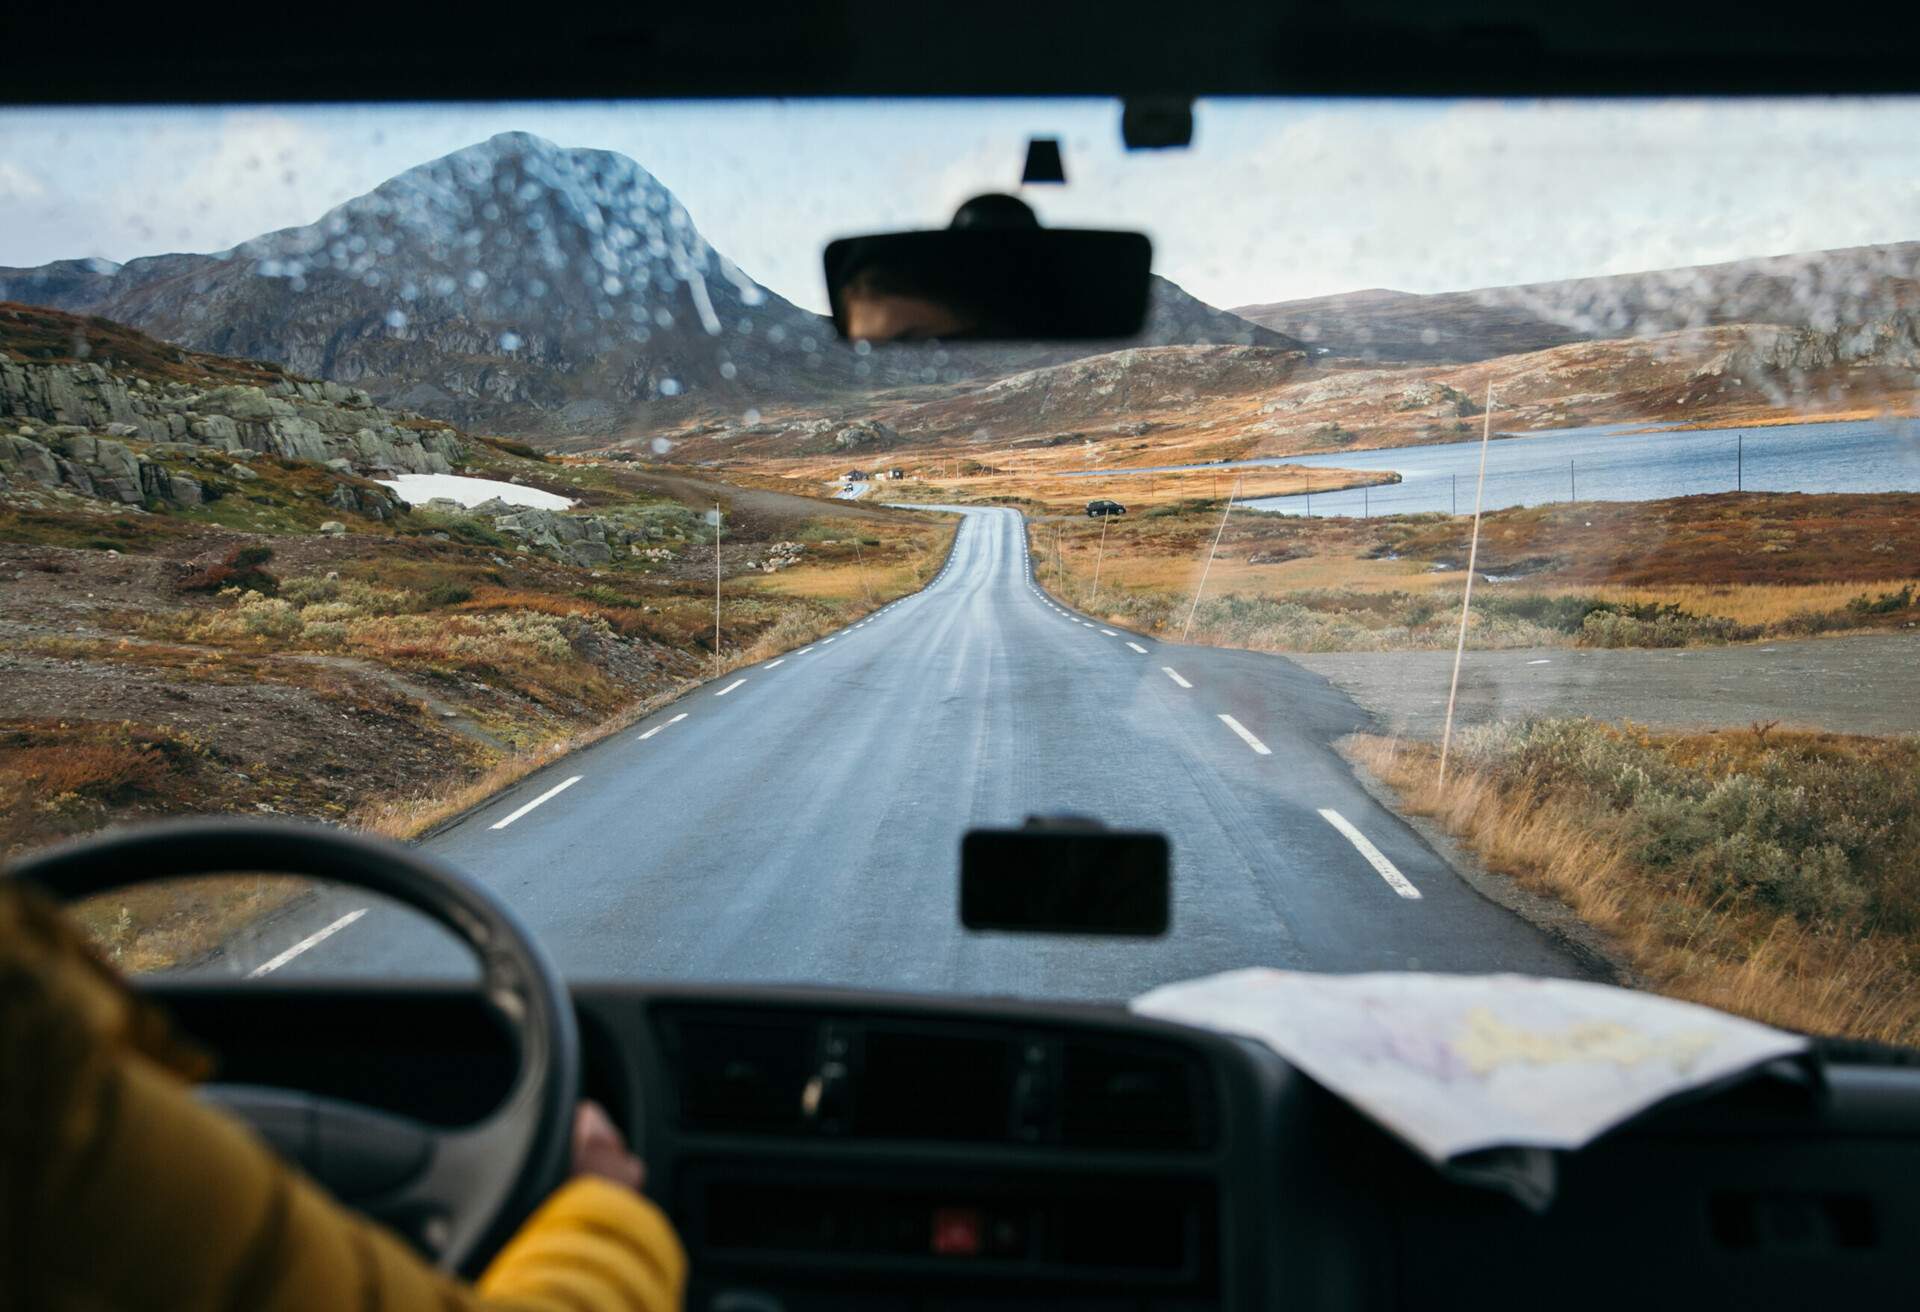 Focus on view from inside adventure car or camper van on amazing cinematic scandinavian landscape. Travel on epic road trip through mountains. Nomadic vanlife lifestyle. Life on the road 